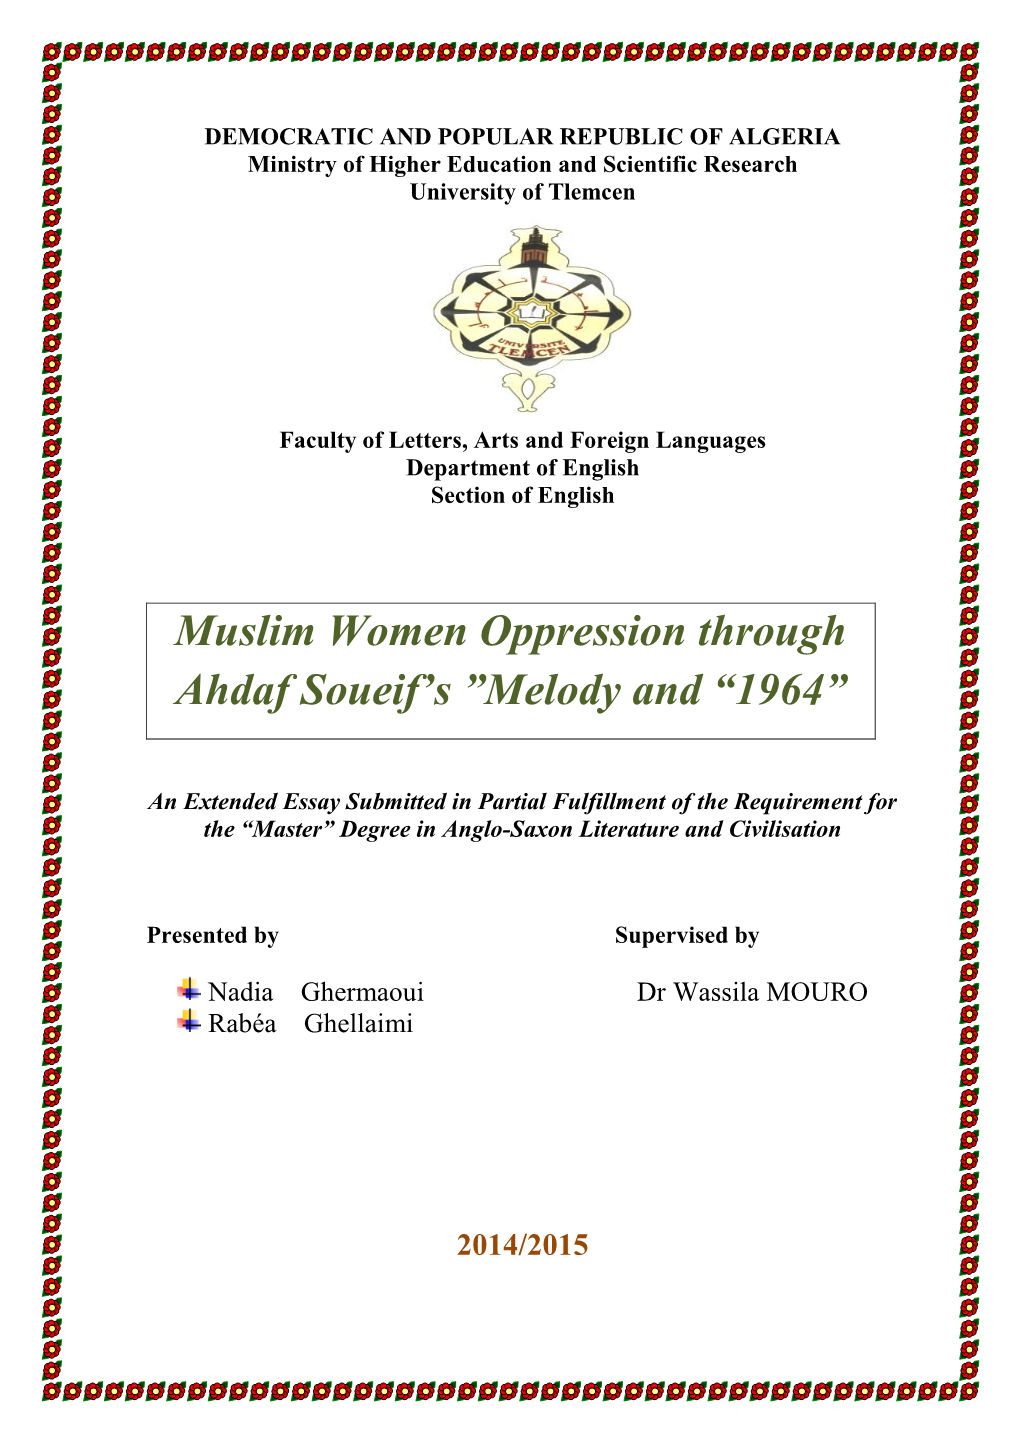 Muslim Women Oppression Through Ahdaf Soueif's ”Melody and “1964”